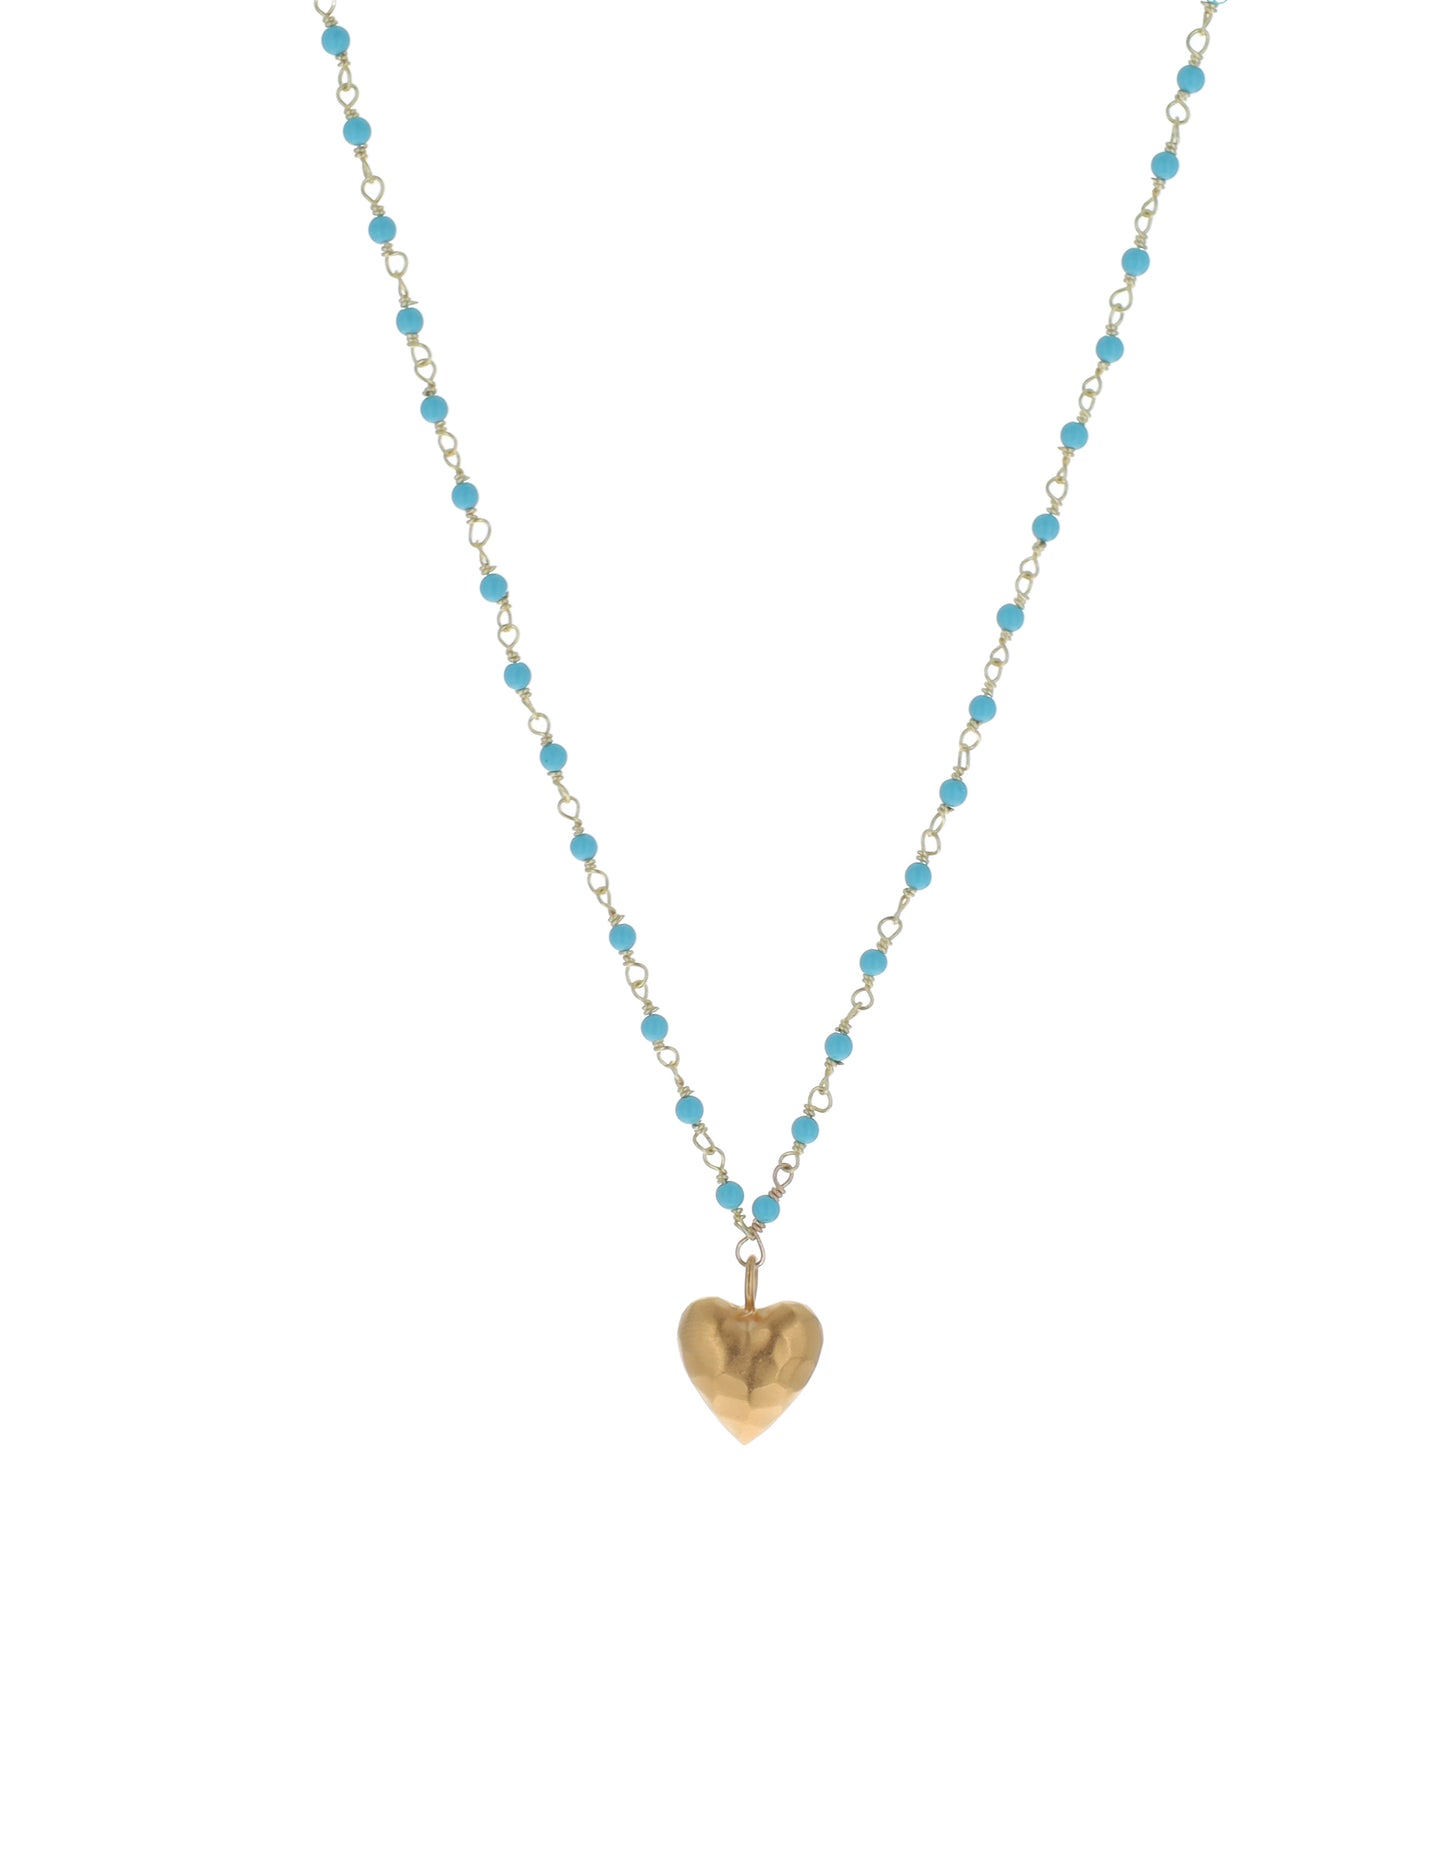 Turquoise Necklace with Big Heart Charm